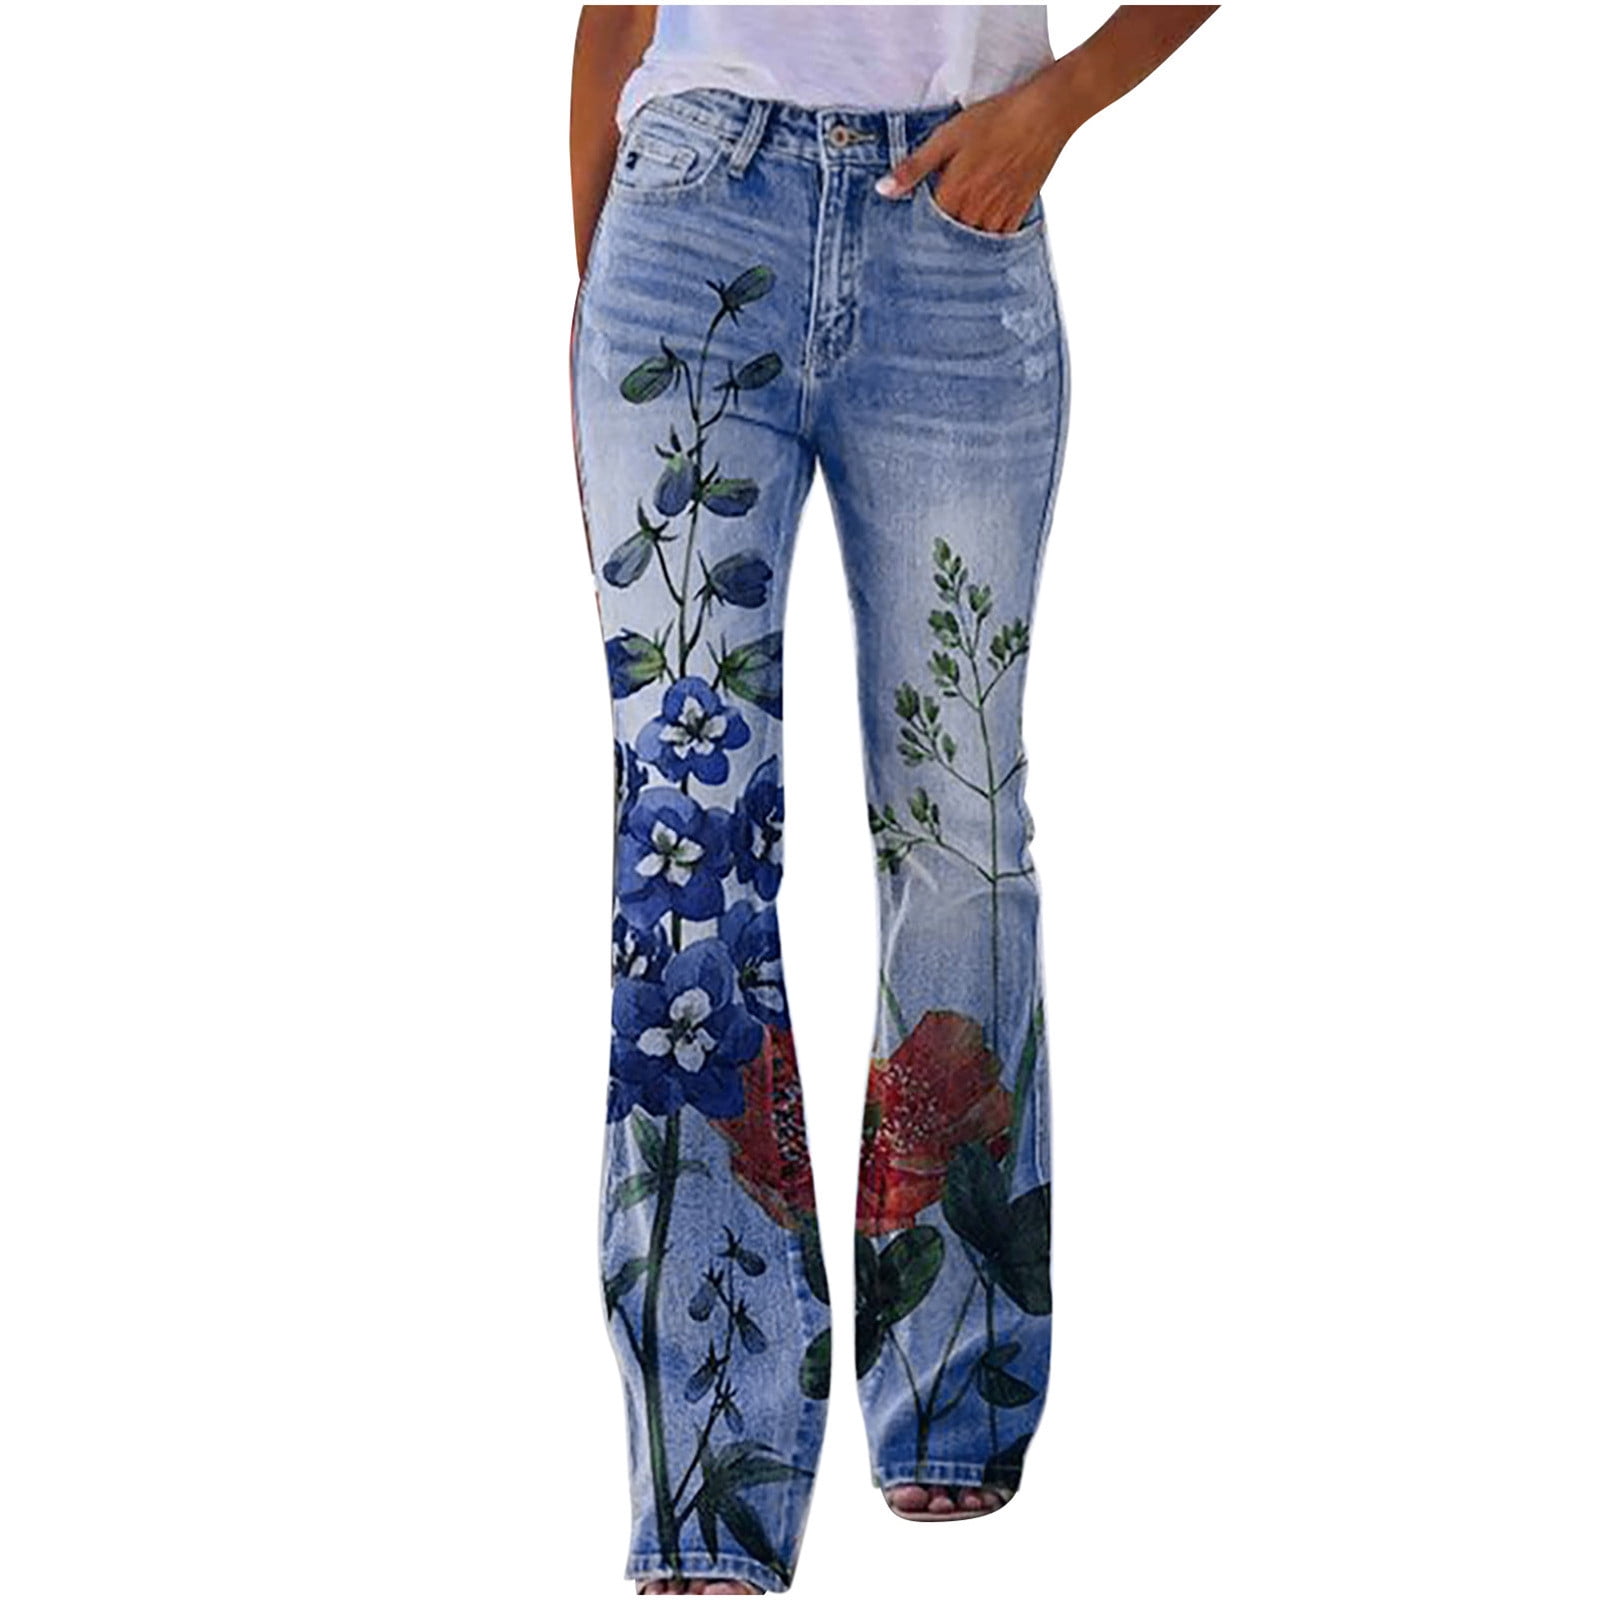 Bell Bottom Pants for Women High Waist Floral Printed Flare Leg Pant  Stretchy Slim-Fit Winter Lounge Ankle Trousers 